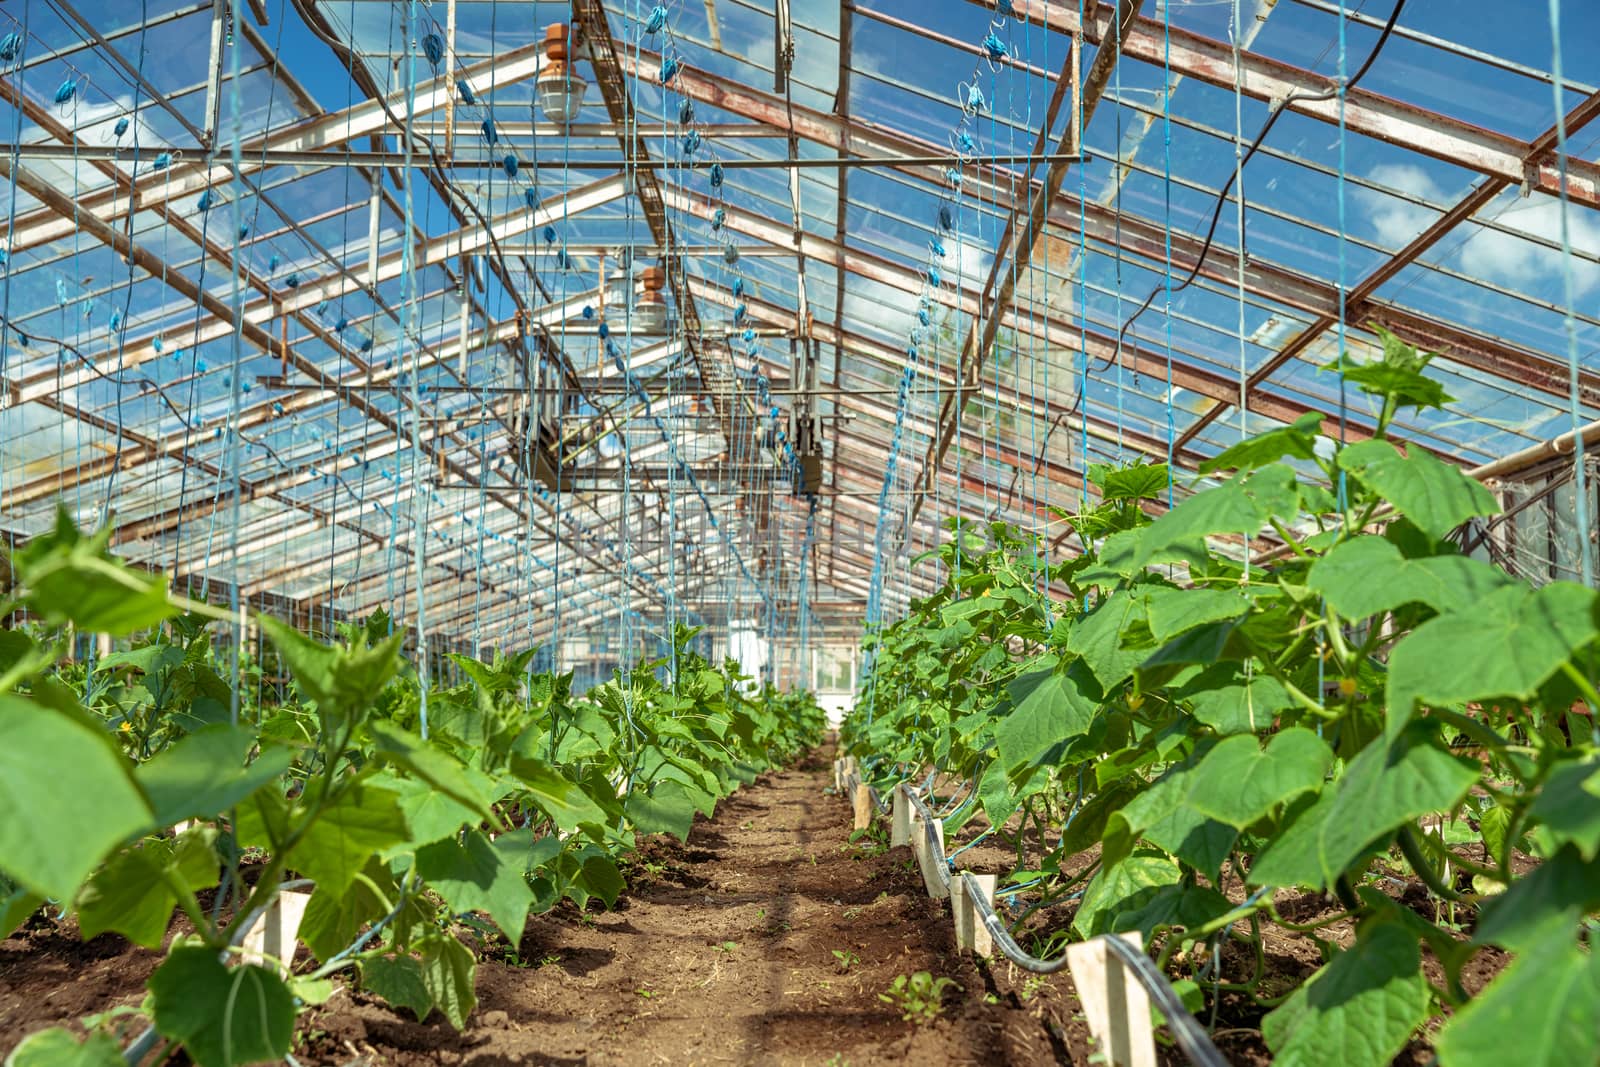 green cucumbers plants growing in a greenhouse on the farm, healthy vegetables without pesticide, organic product by Edophoto